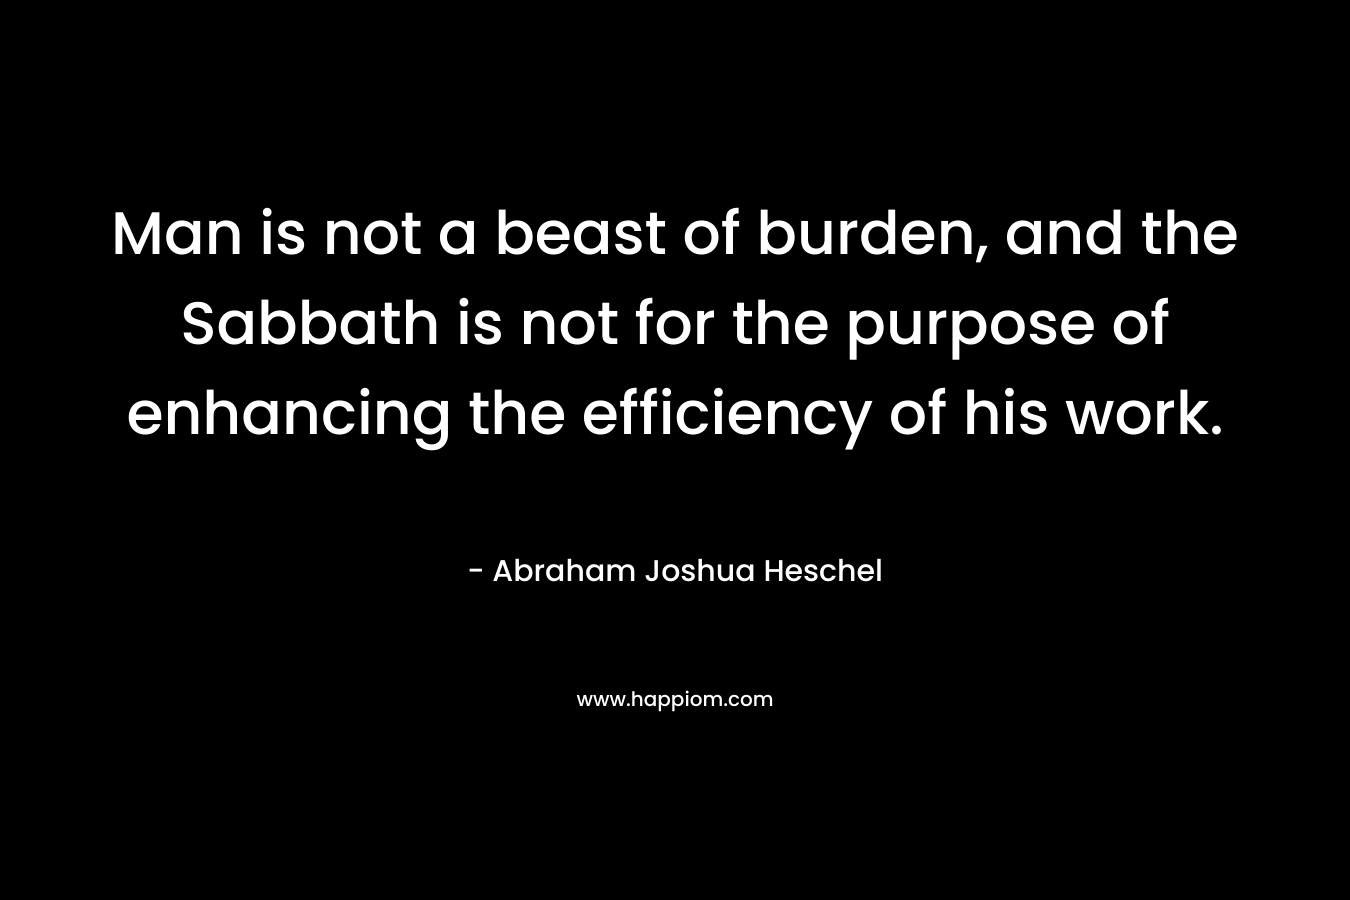 Man is not a beast of burden, and the Sabbath is not for the purpose of enhancing the efficiency of his work.